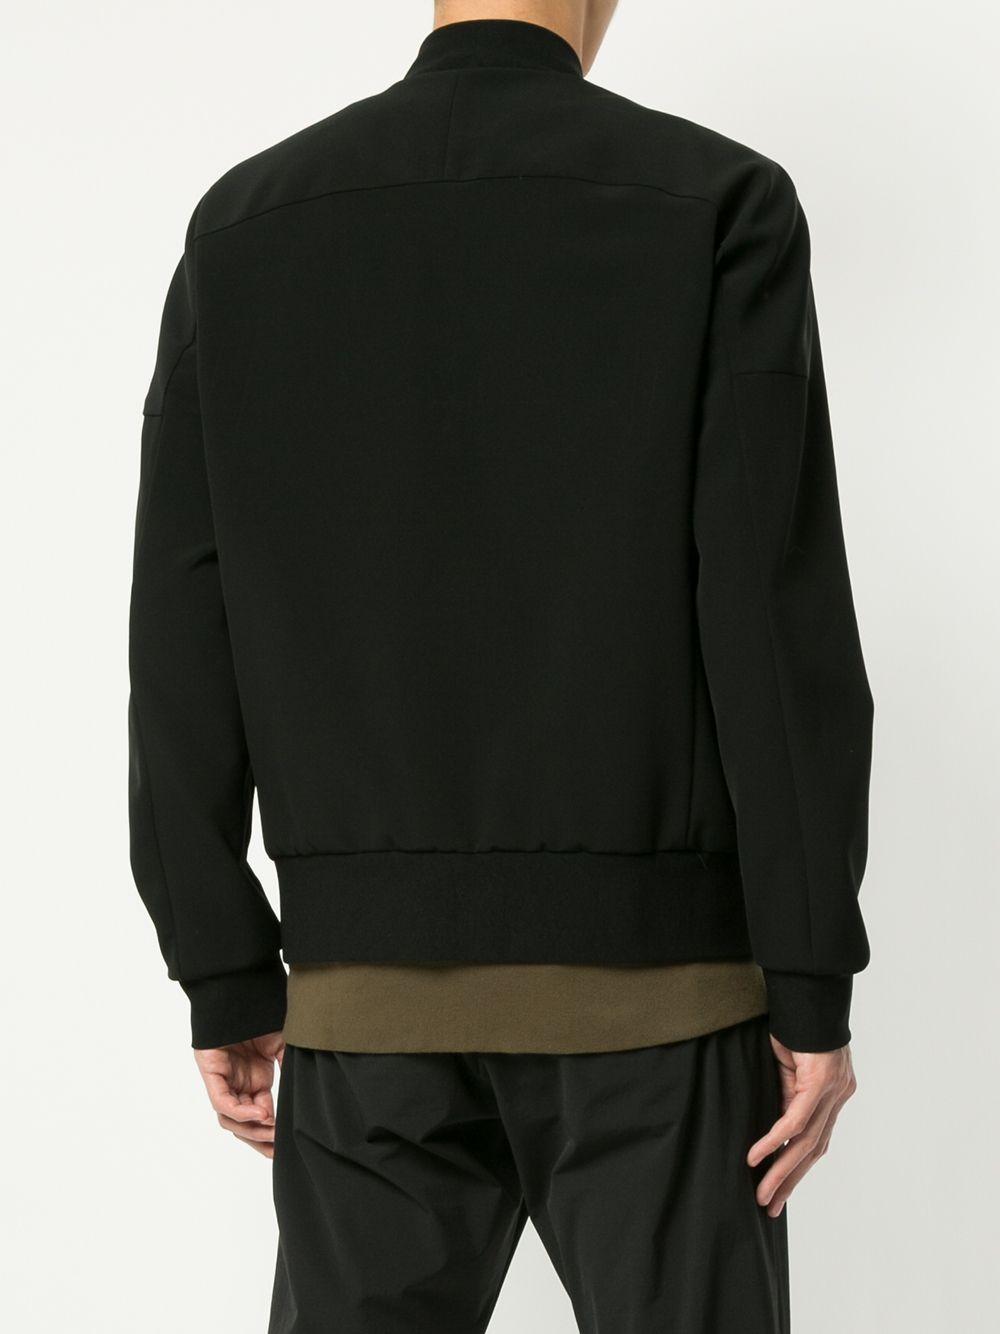 Lyst - Attachment Zip-up Bomber Jacket in Black for Men